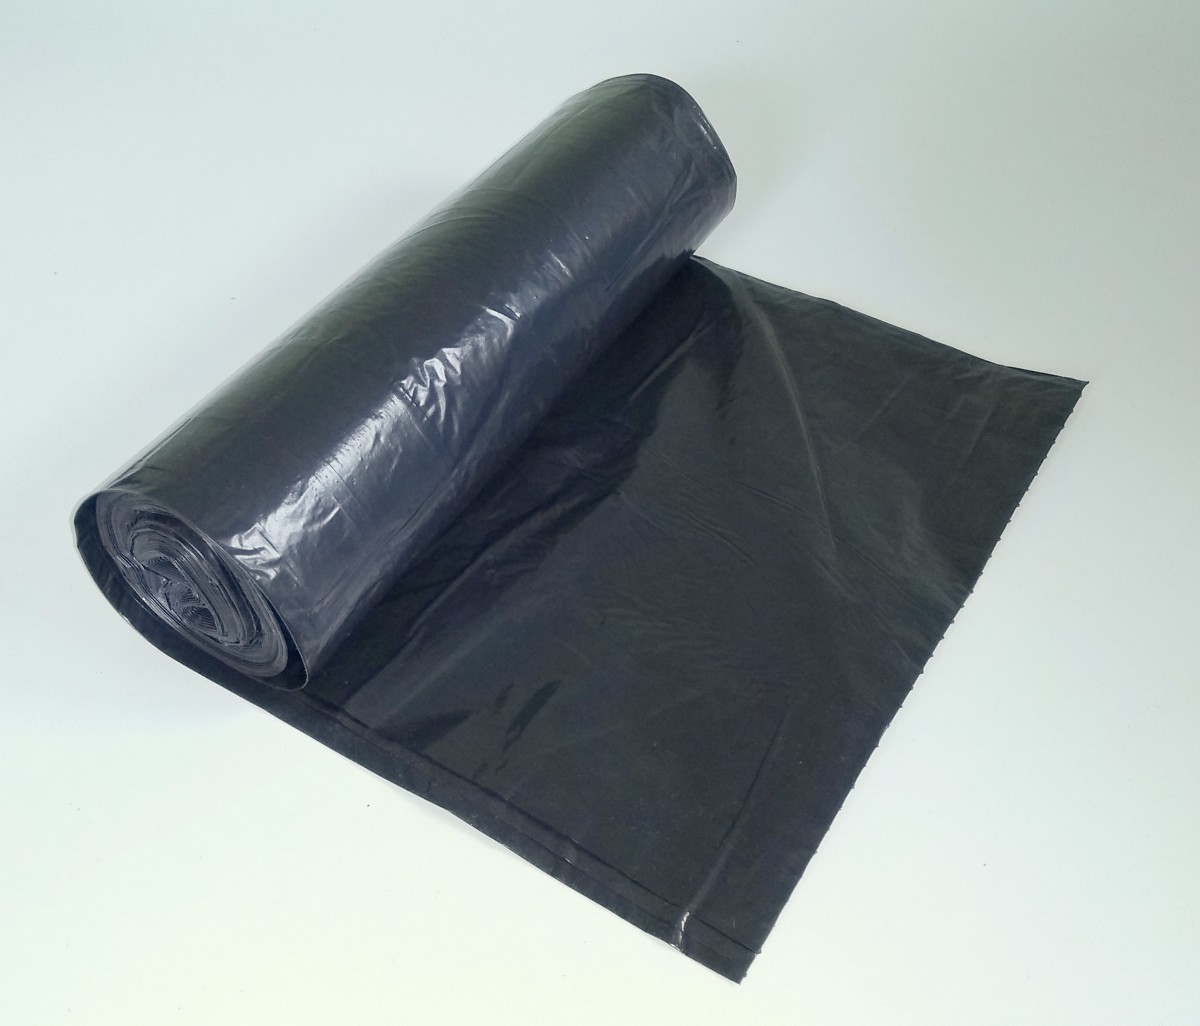 You can use a refuse sack (trash bag) for covering the ground or floor.